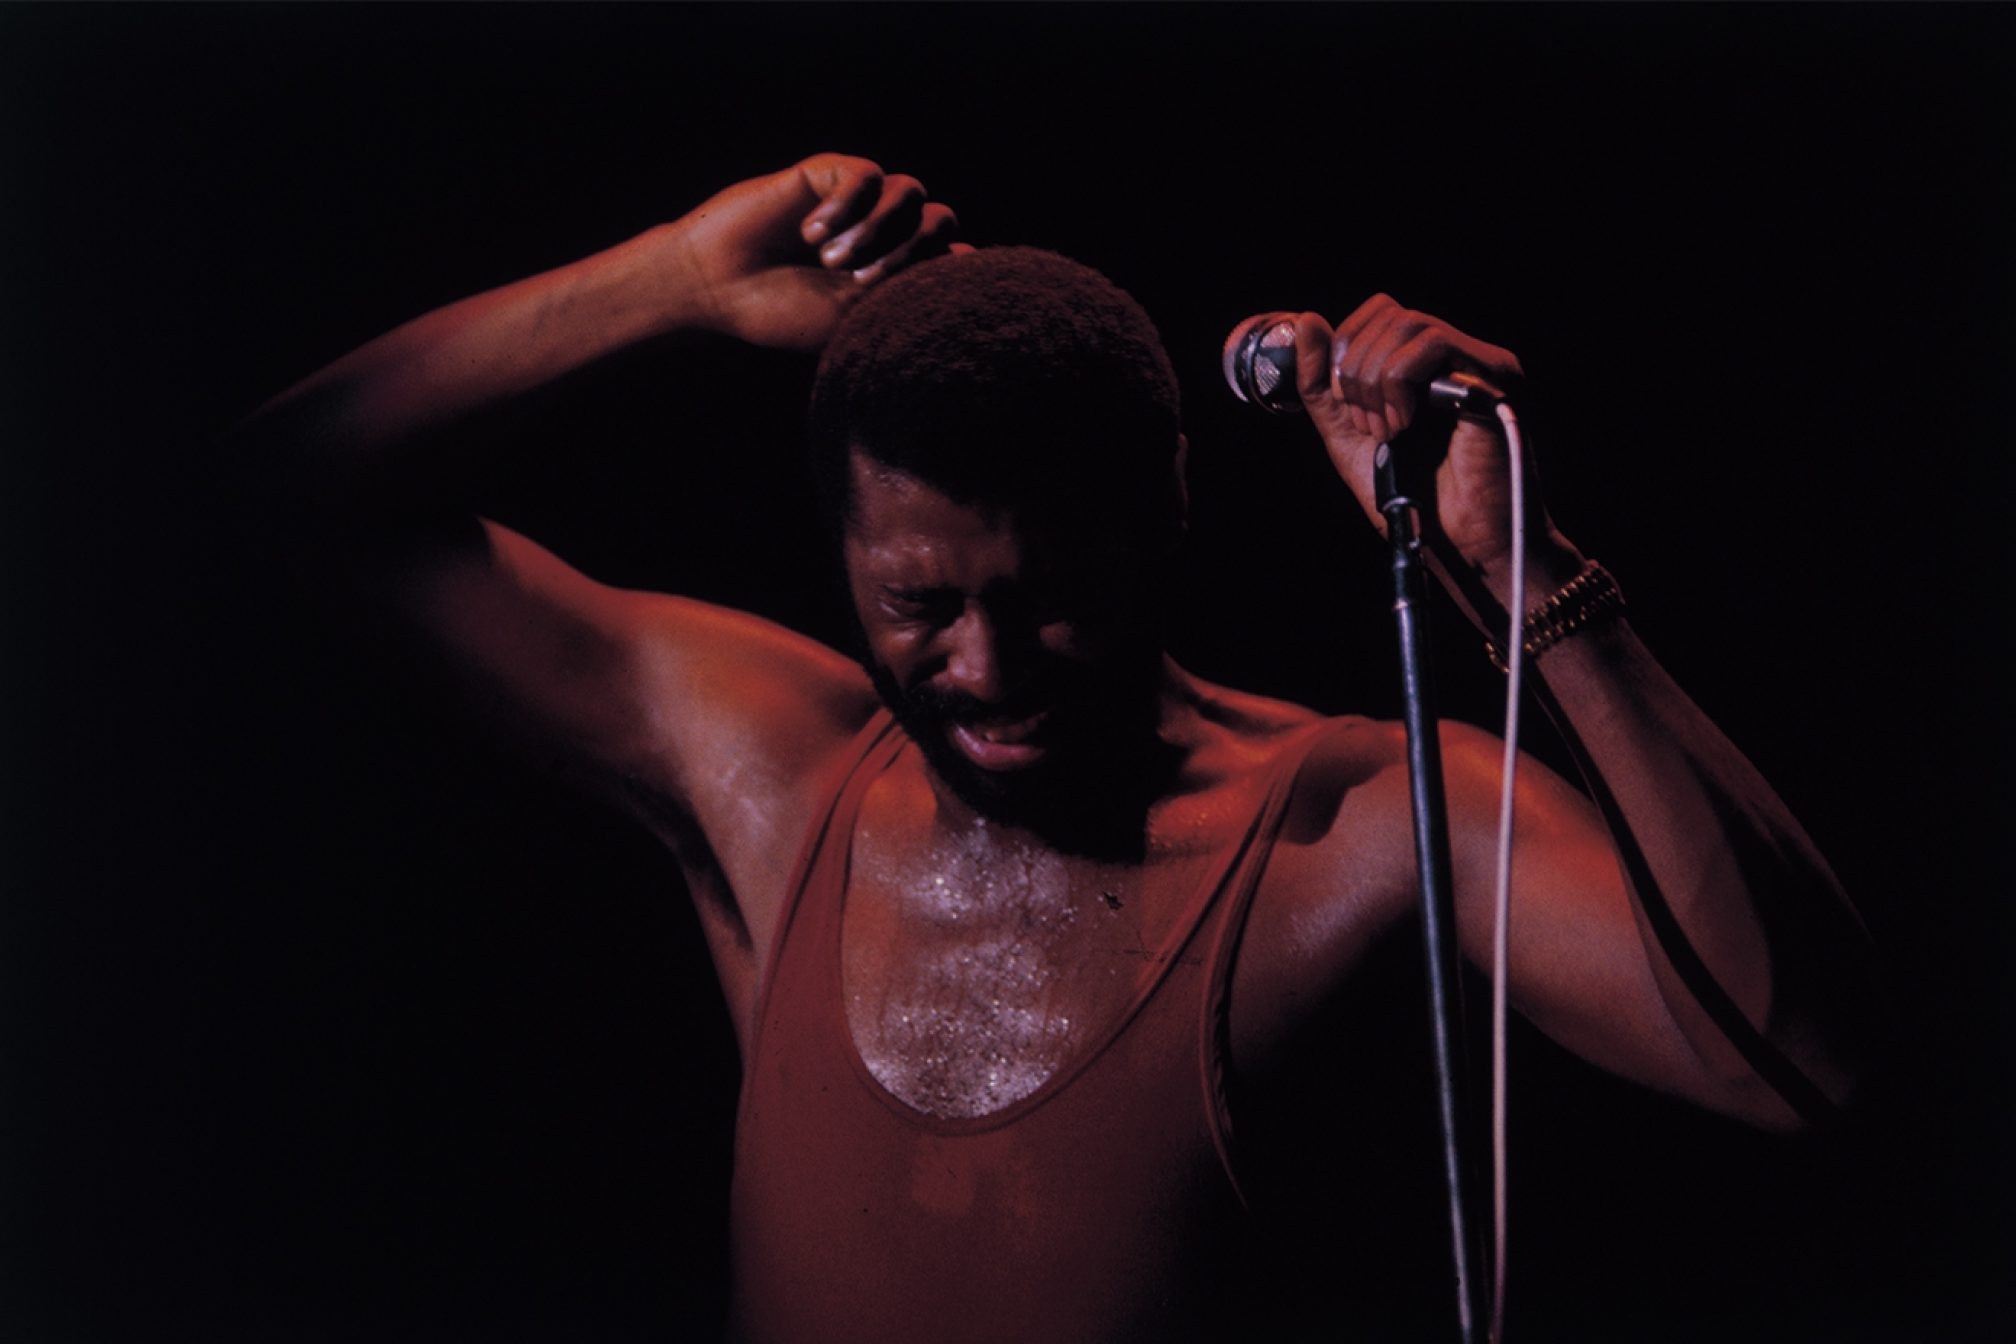 Teddy Pendergrass weearing brown tank top while holding a mic